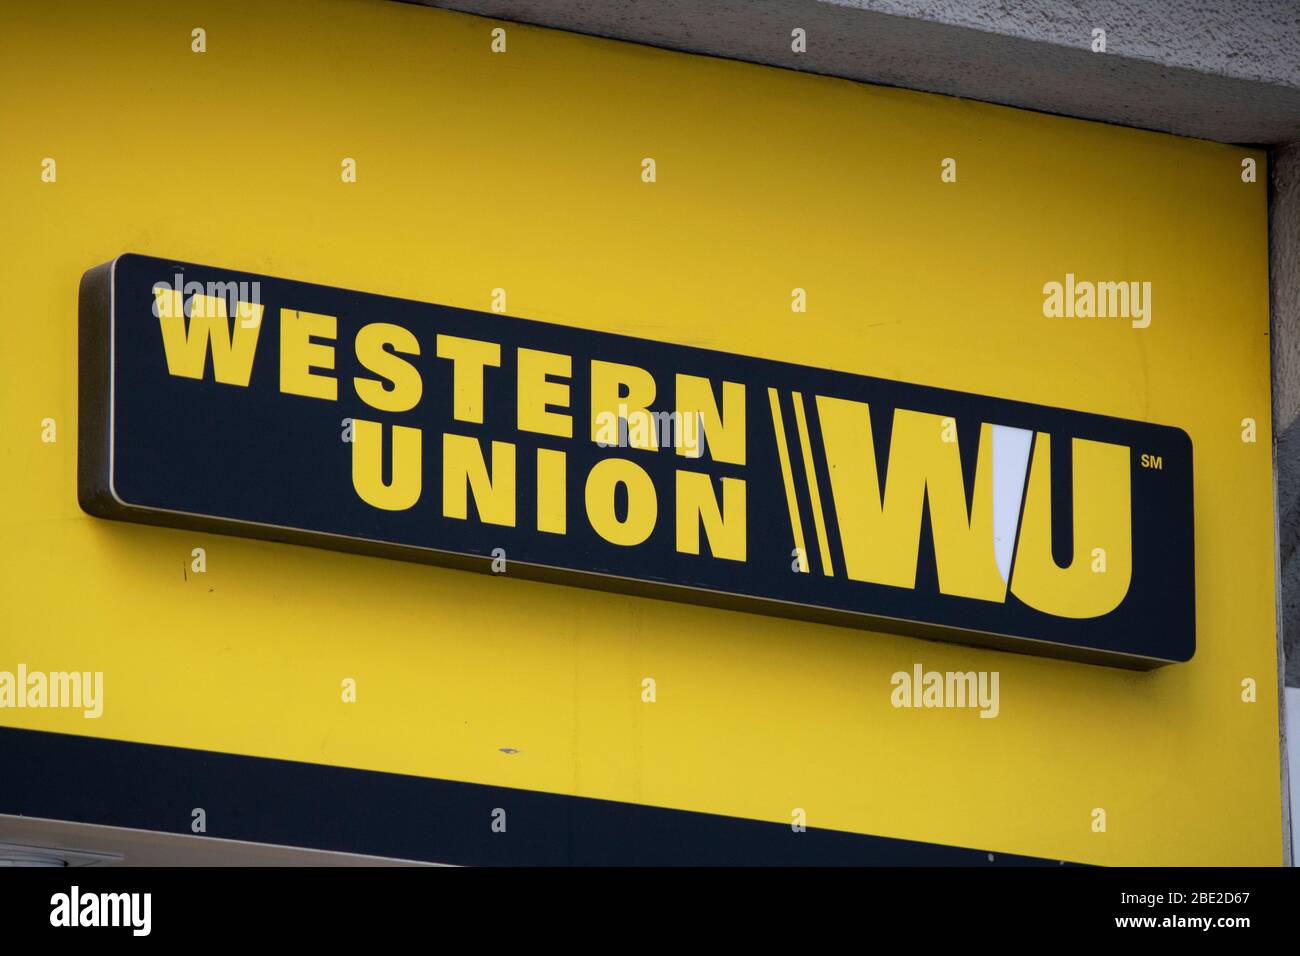 Western Union Logo High Resolution Stock Photography and Images - Alamy